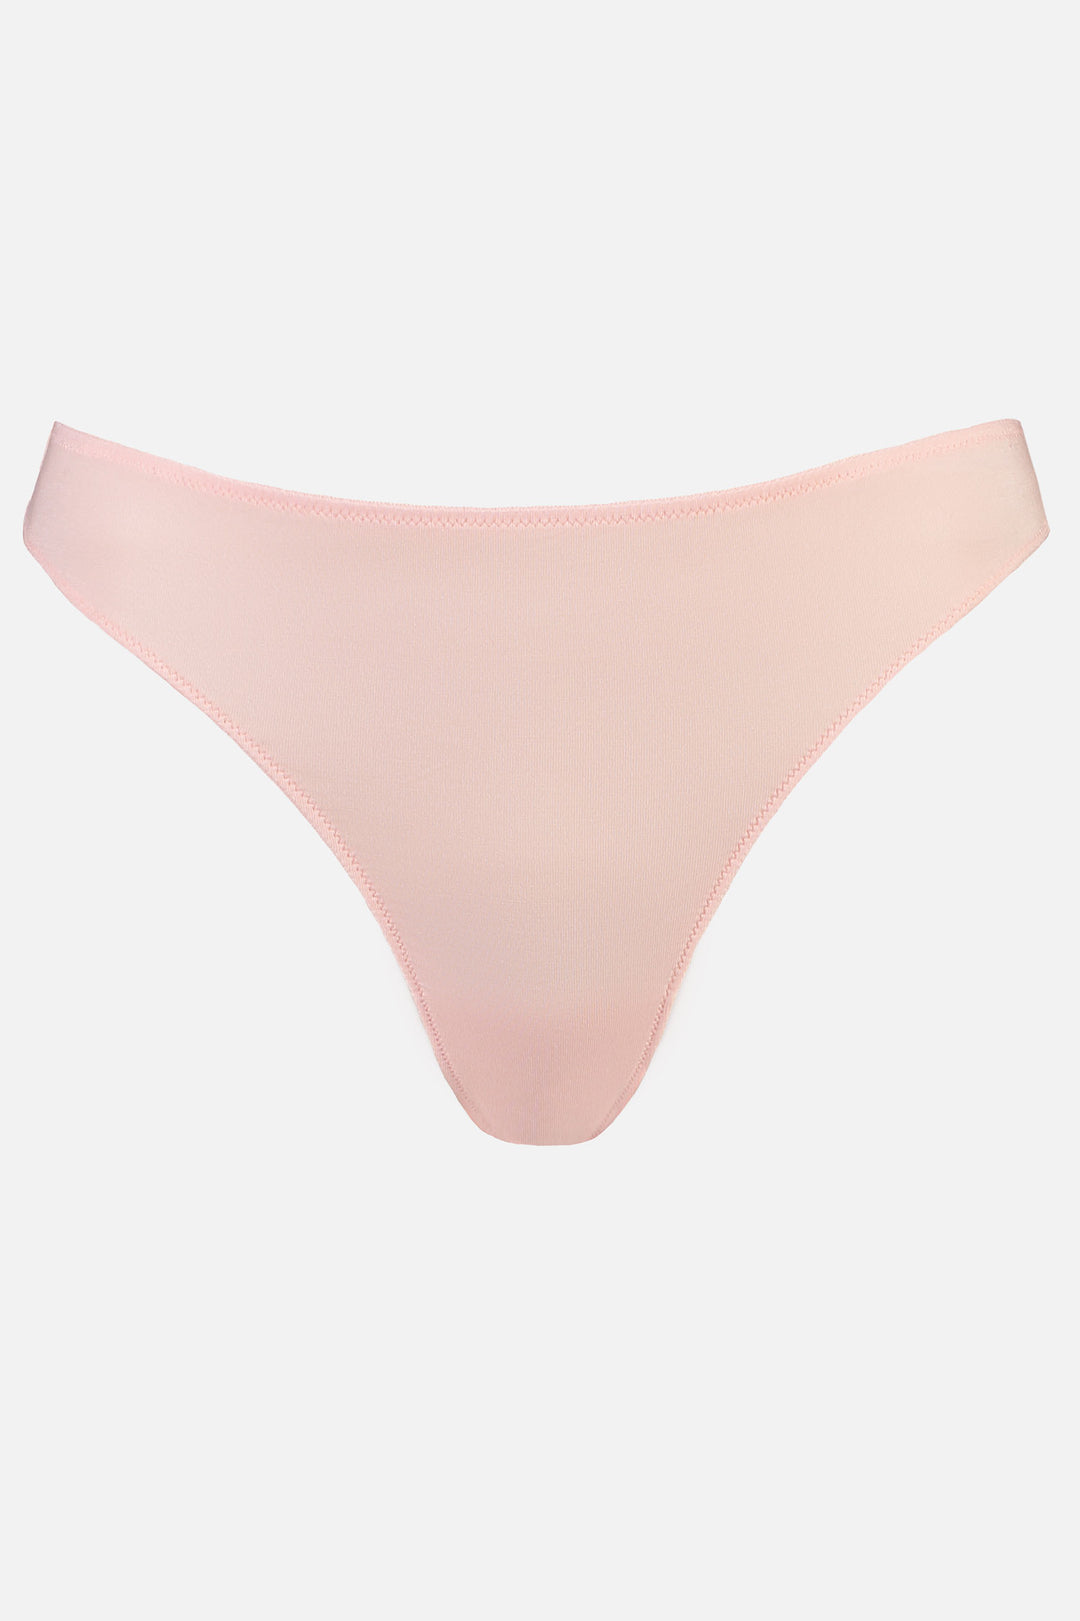 Videris Lingerie thong in rosy pink TENCEL™ a comfortable mid-rise style cut to follow the natural curve of your hips